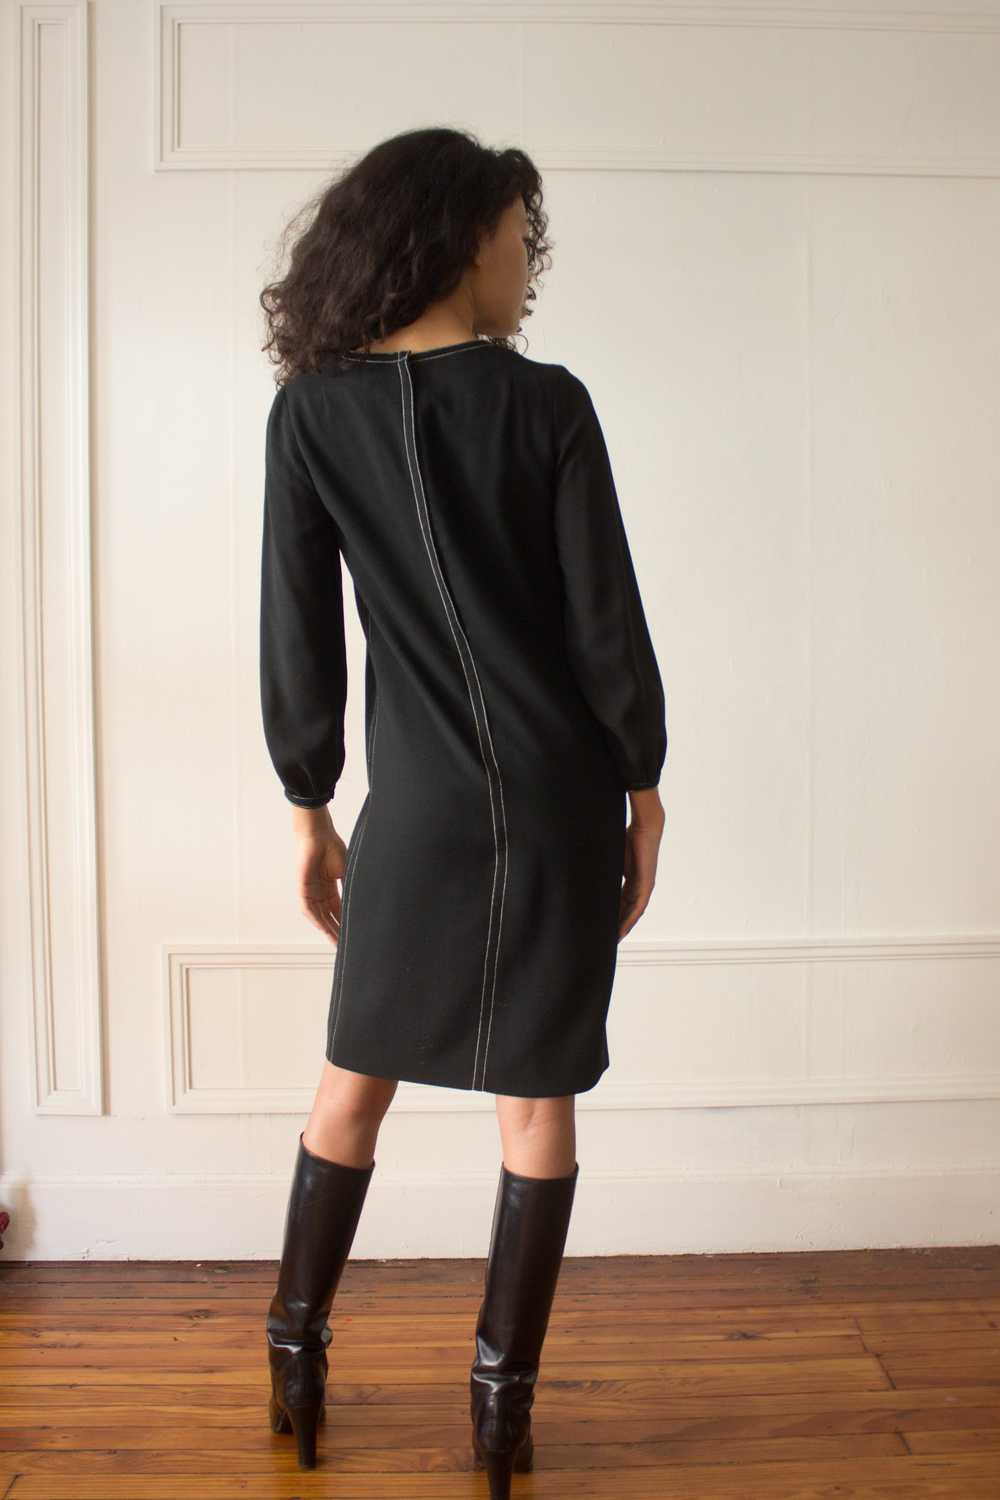 1960s Black Shift Dress with Contrast Stitching - image 3